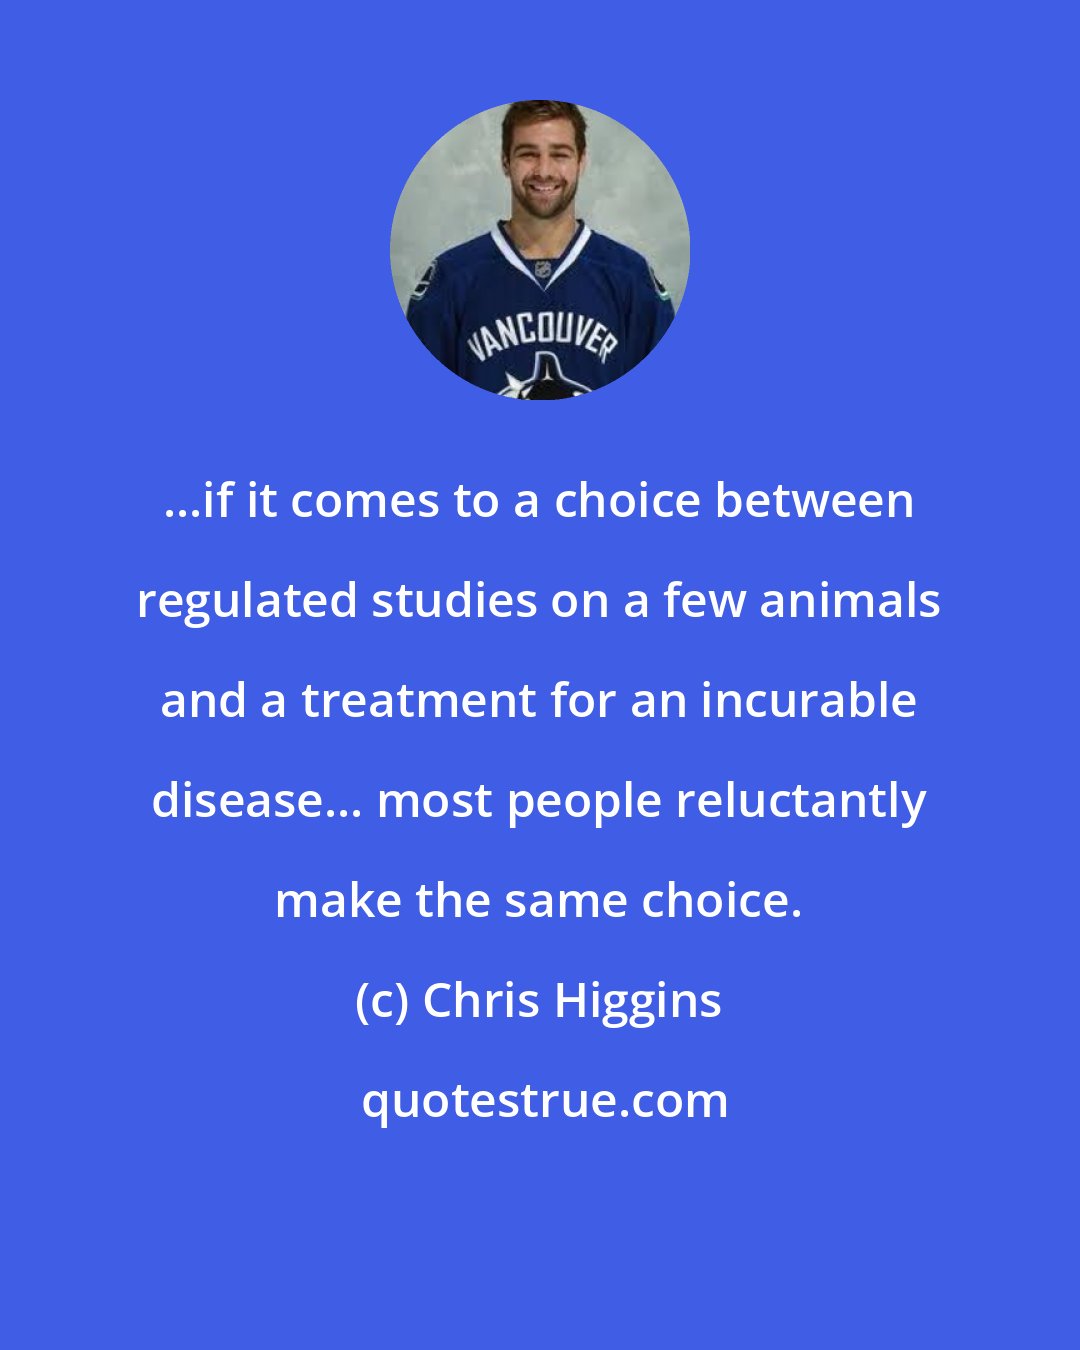 Chris Higgins: ...if it comes to a choice between regulated studies on a few animals and a treatment for an incurable disease... most people reluctantly make the same choice.